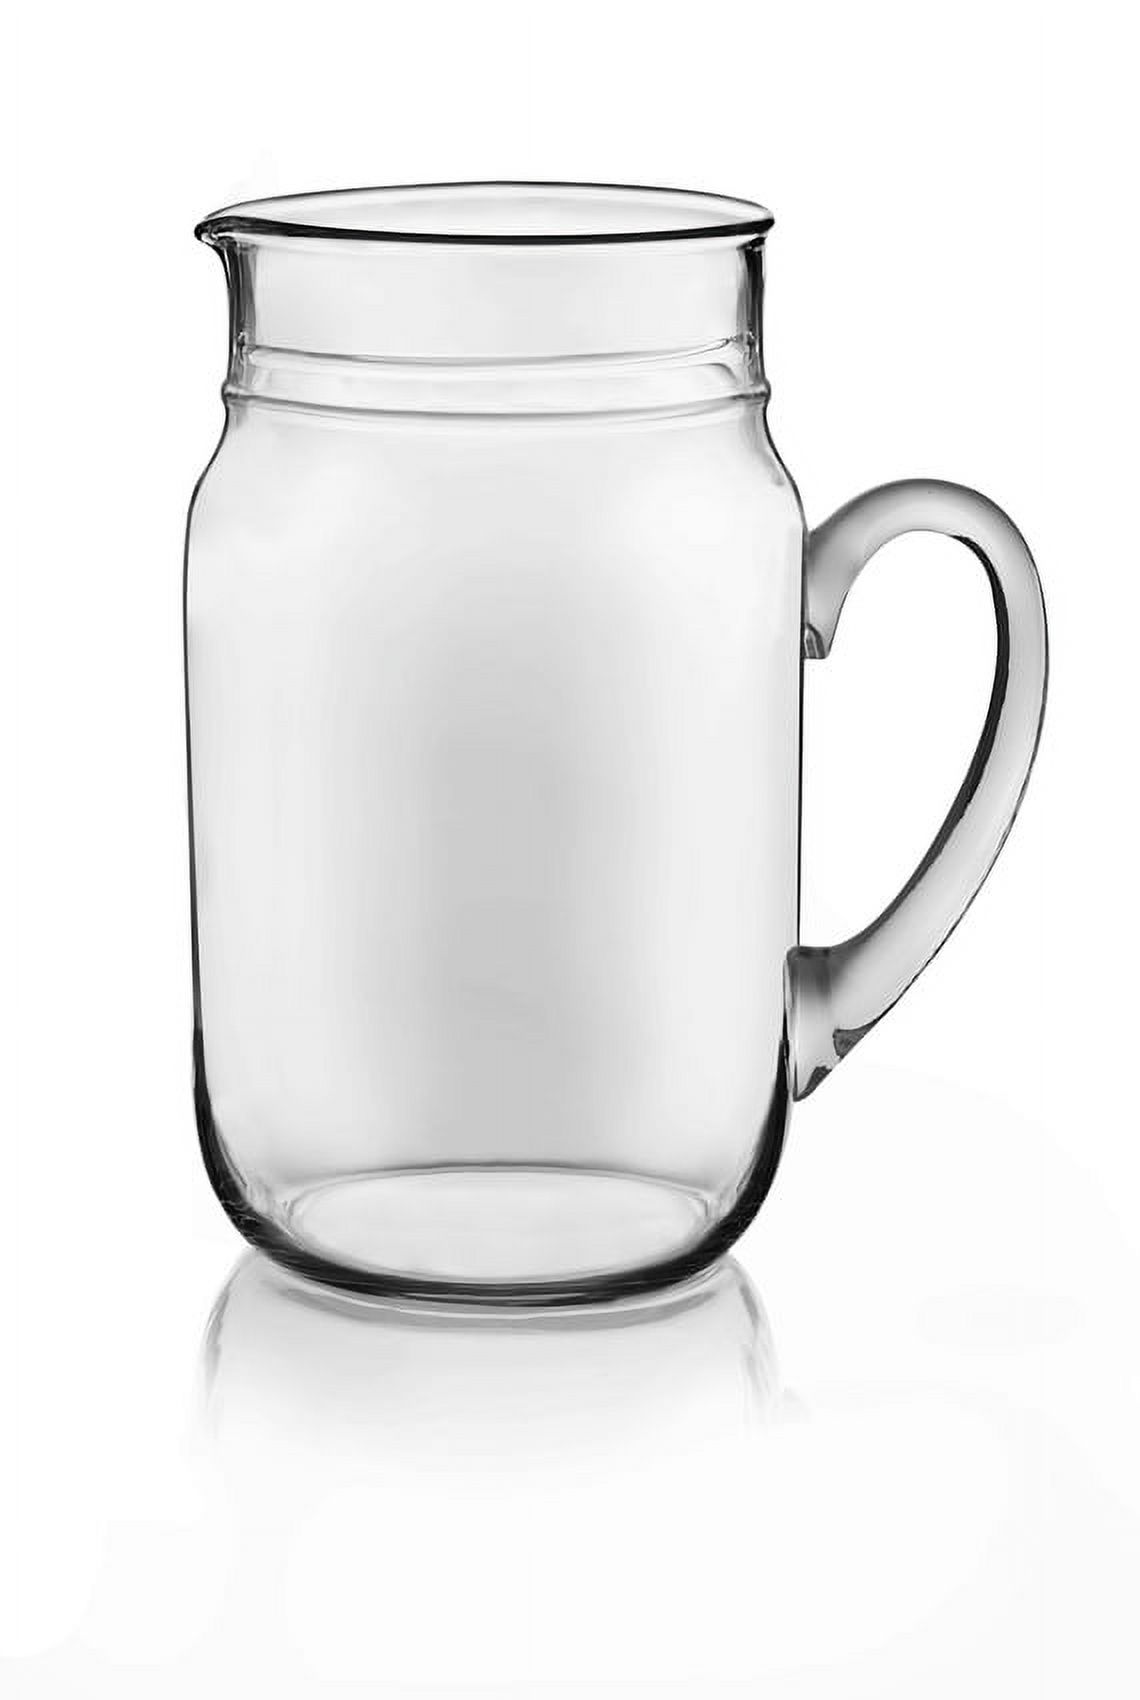 Libbey Drinking Jar Pitcher, Glass - image 3 of 4